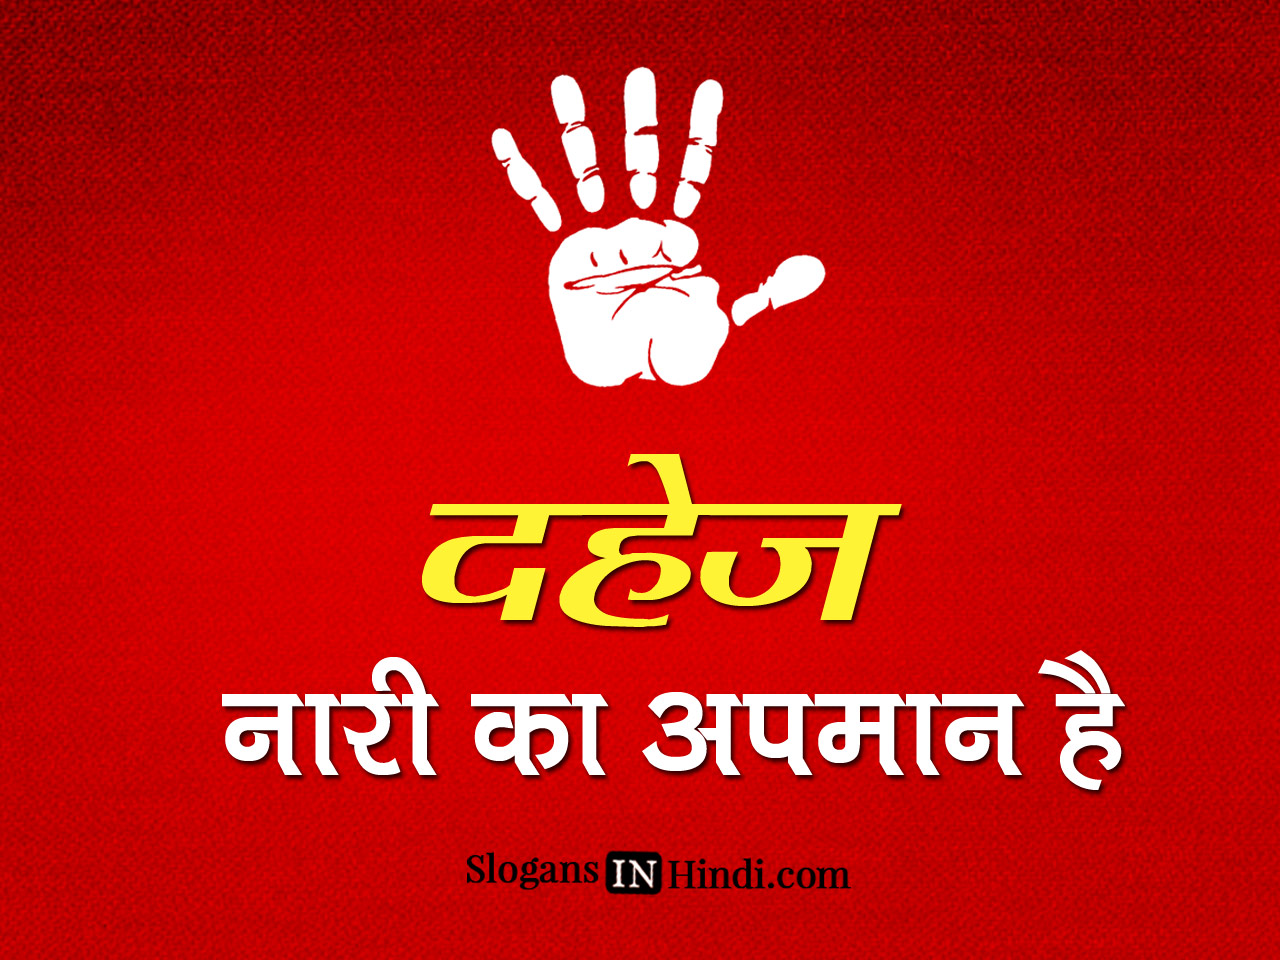 slogans on dowry prohibition